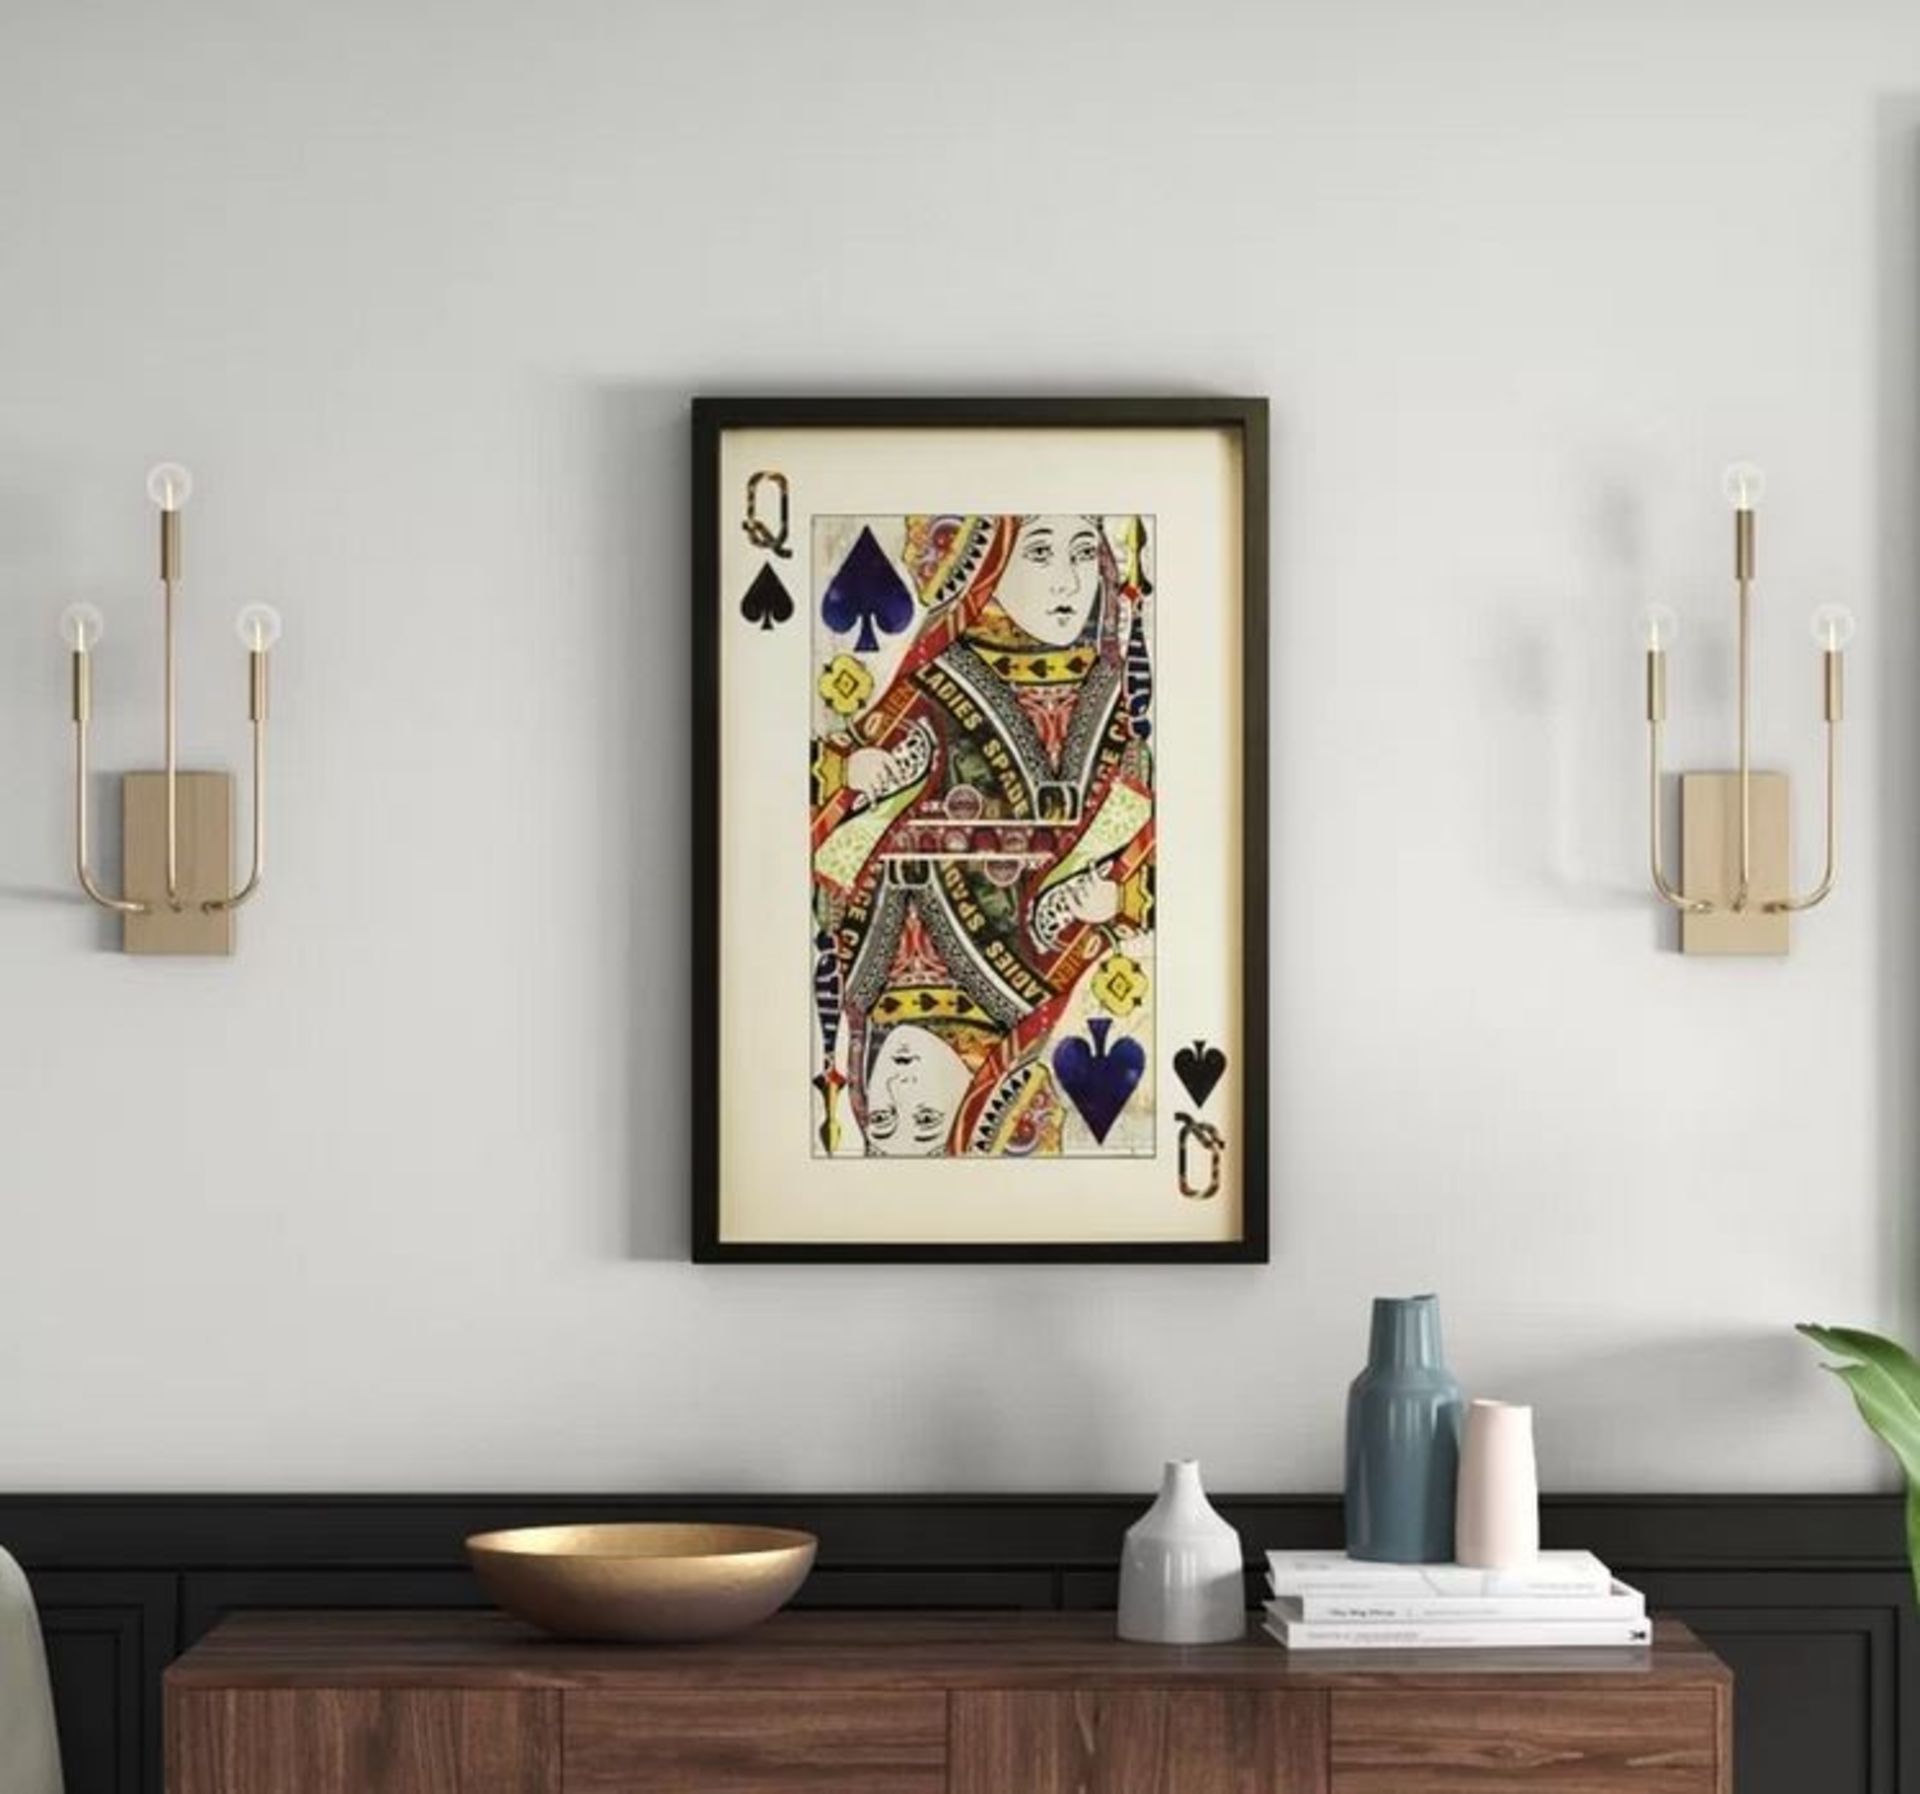 HOUSE ADDITIONS 3D COLLAGE QUEEN CARD' FRAMED GRAPHIC ART PRINT